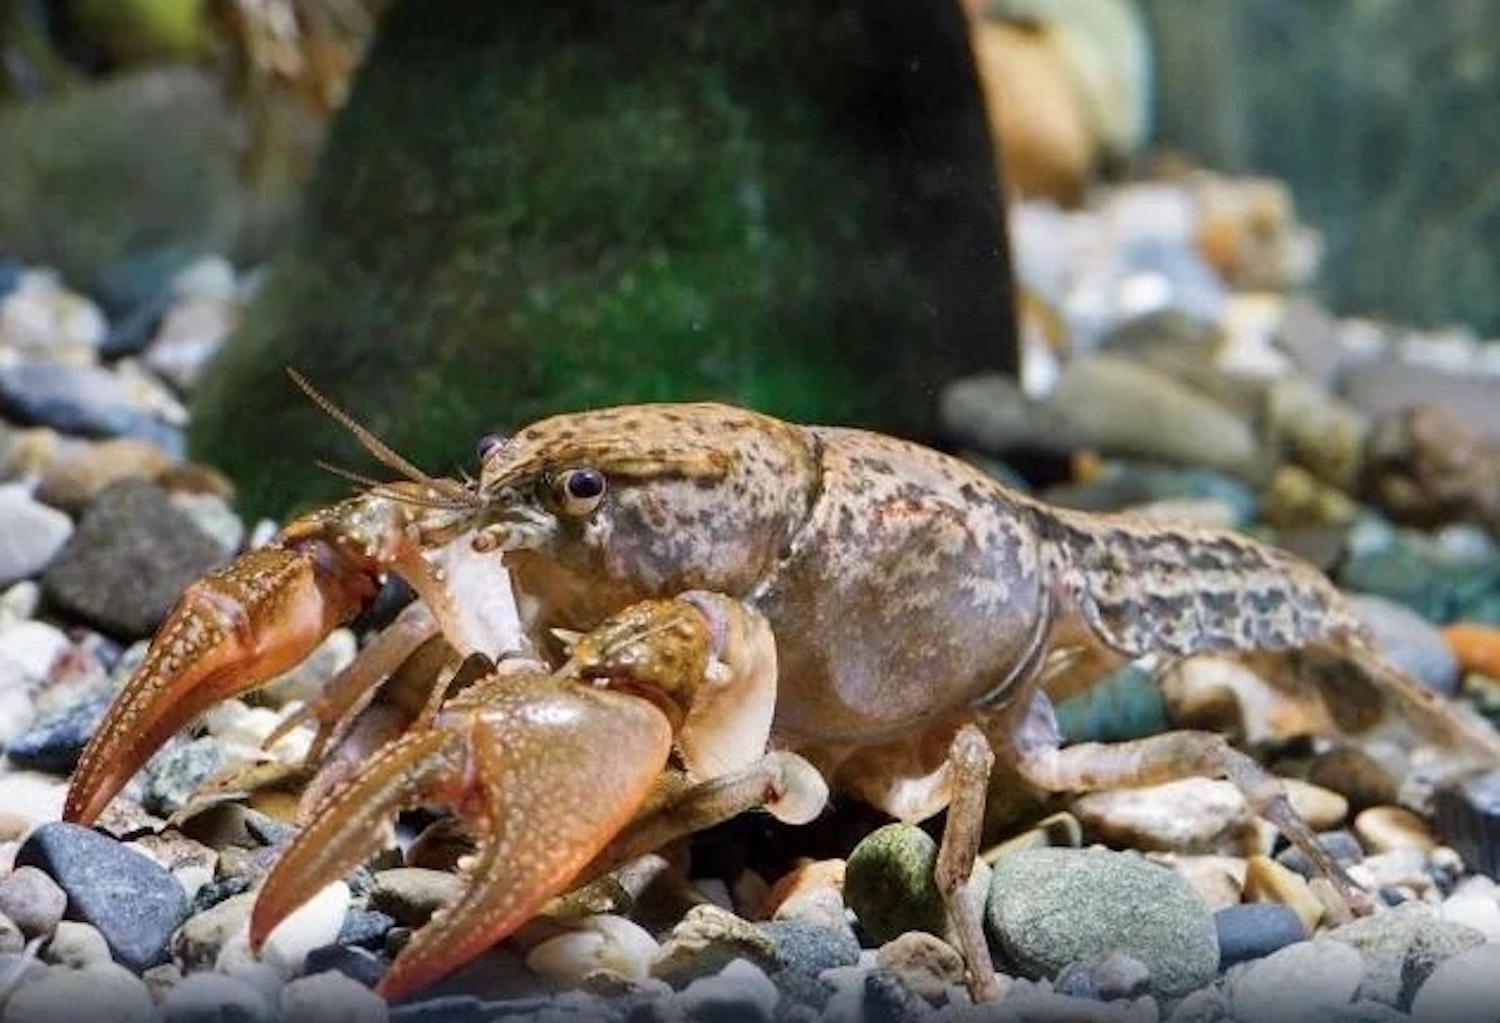 A crayfish in the water.